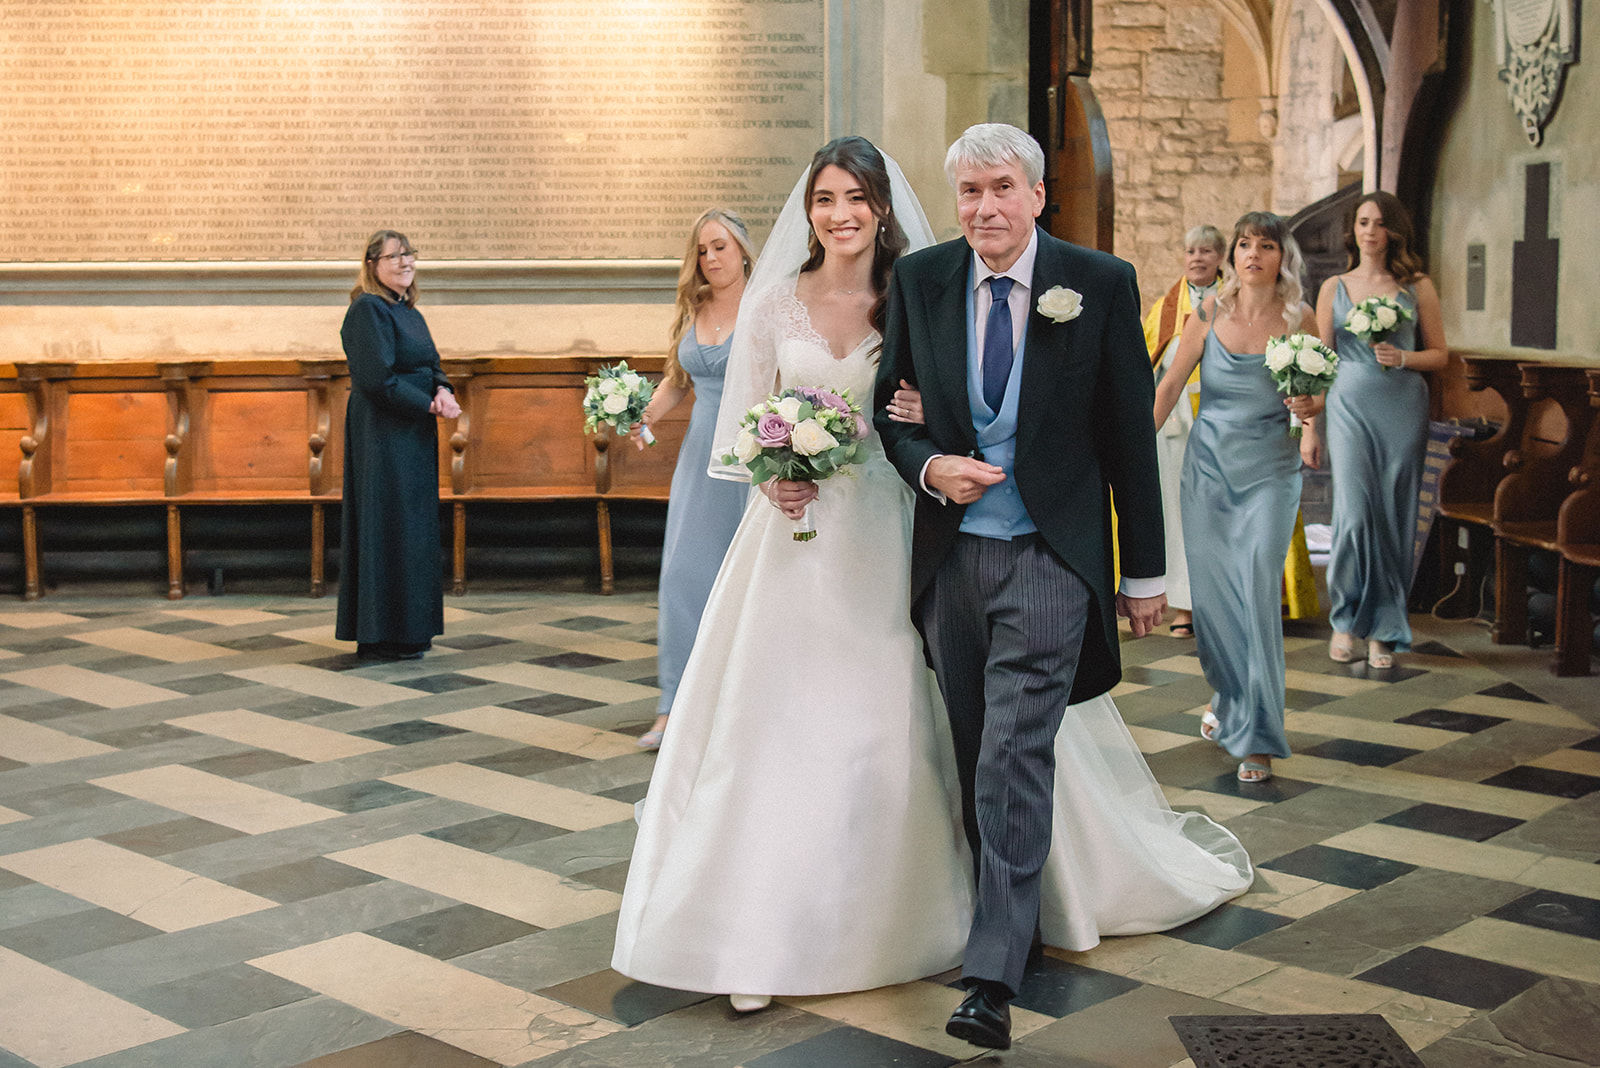 Katherine escorted by her father inside the New College Chapel